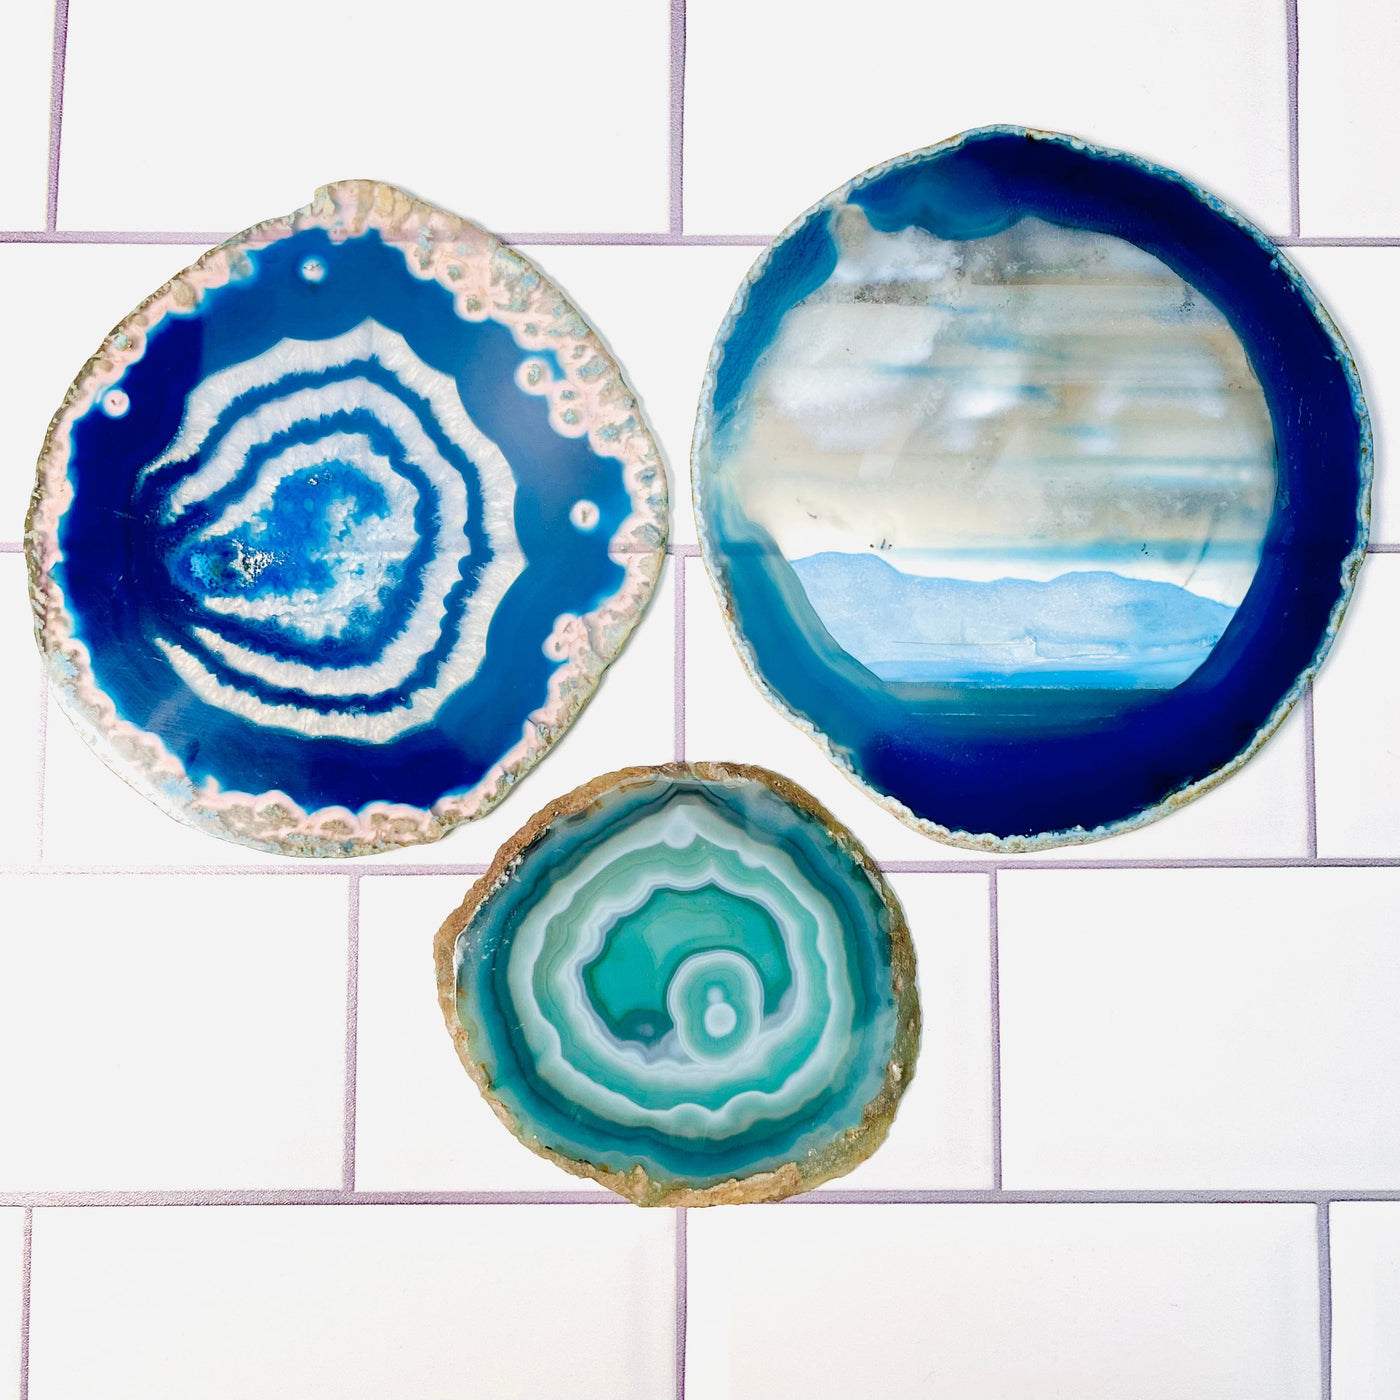 Set of 3 Agate Slices - Dyed Blue and Green, displayed on a tile surface.